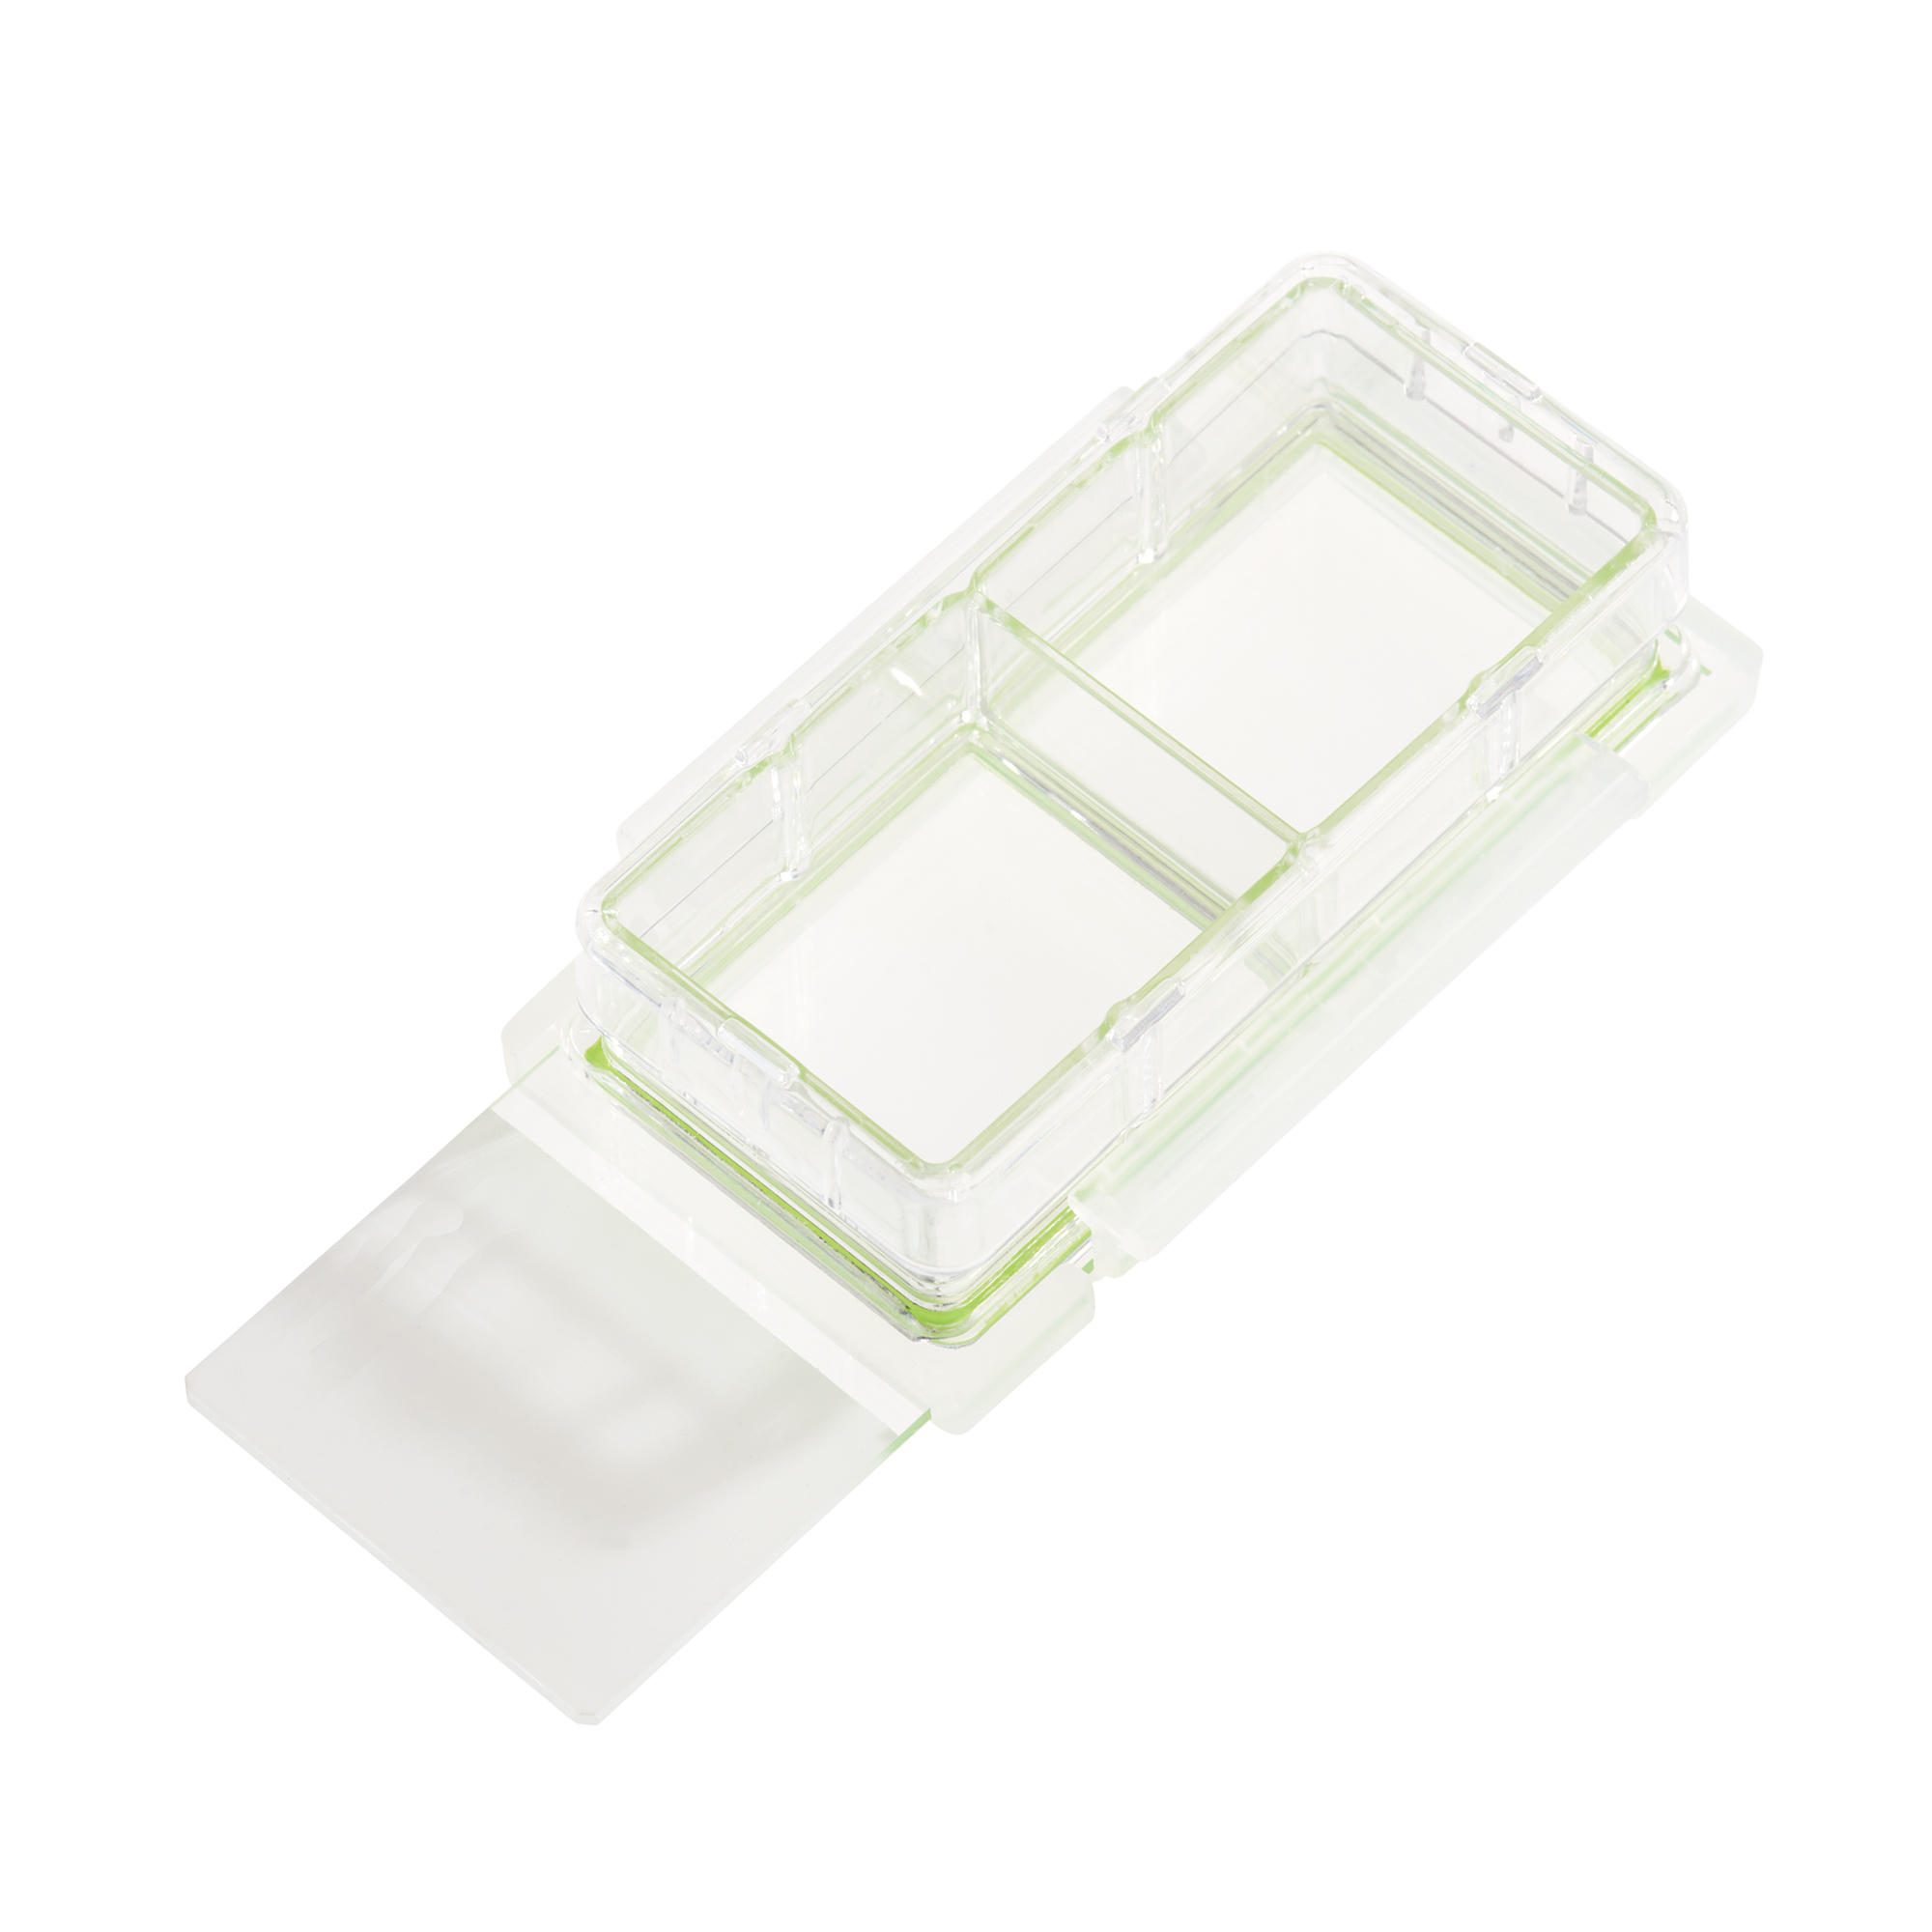 4.55 cm2 0.59 Height 1.2-2.5 mL 2.952 Length White Pack of 12 Nest Scientific 230122 Cell Culture Chamber Slides 0.18 fl Glass 0.984 Width 2 Well with Glass Slide oz 